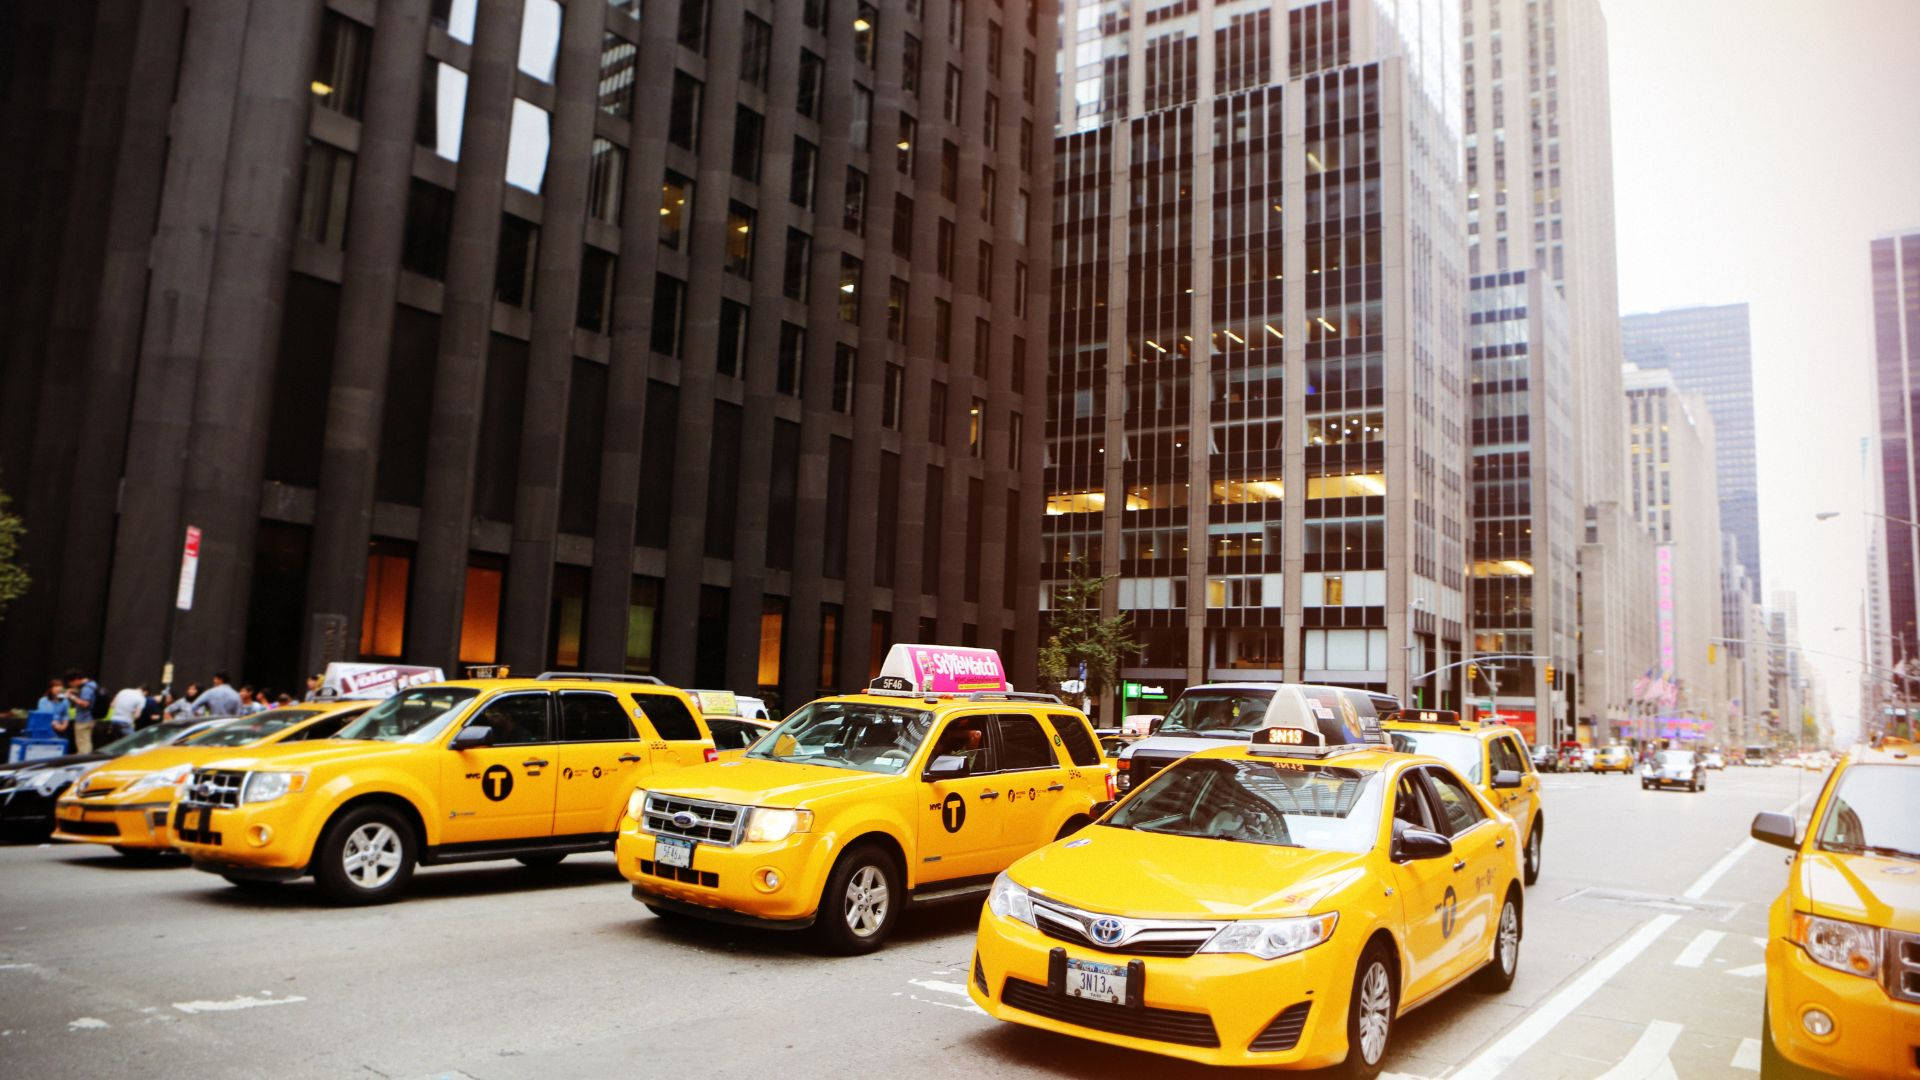 Cityscape with a Fleet of Taxis Wallpaper